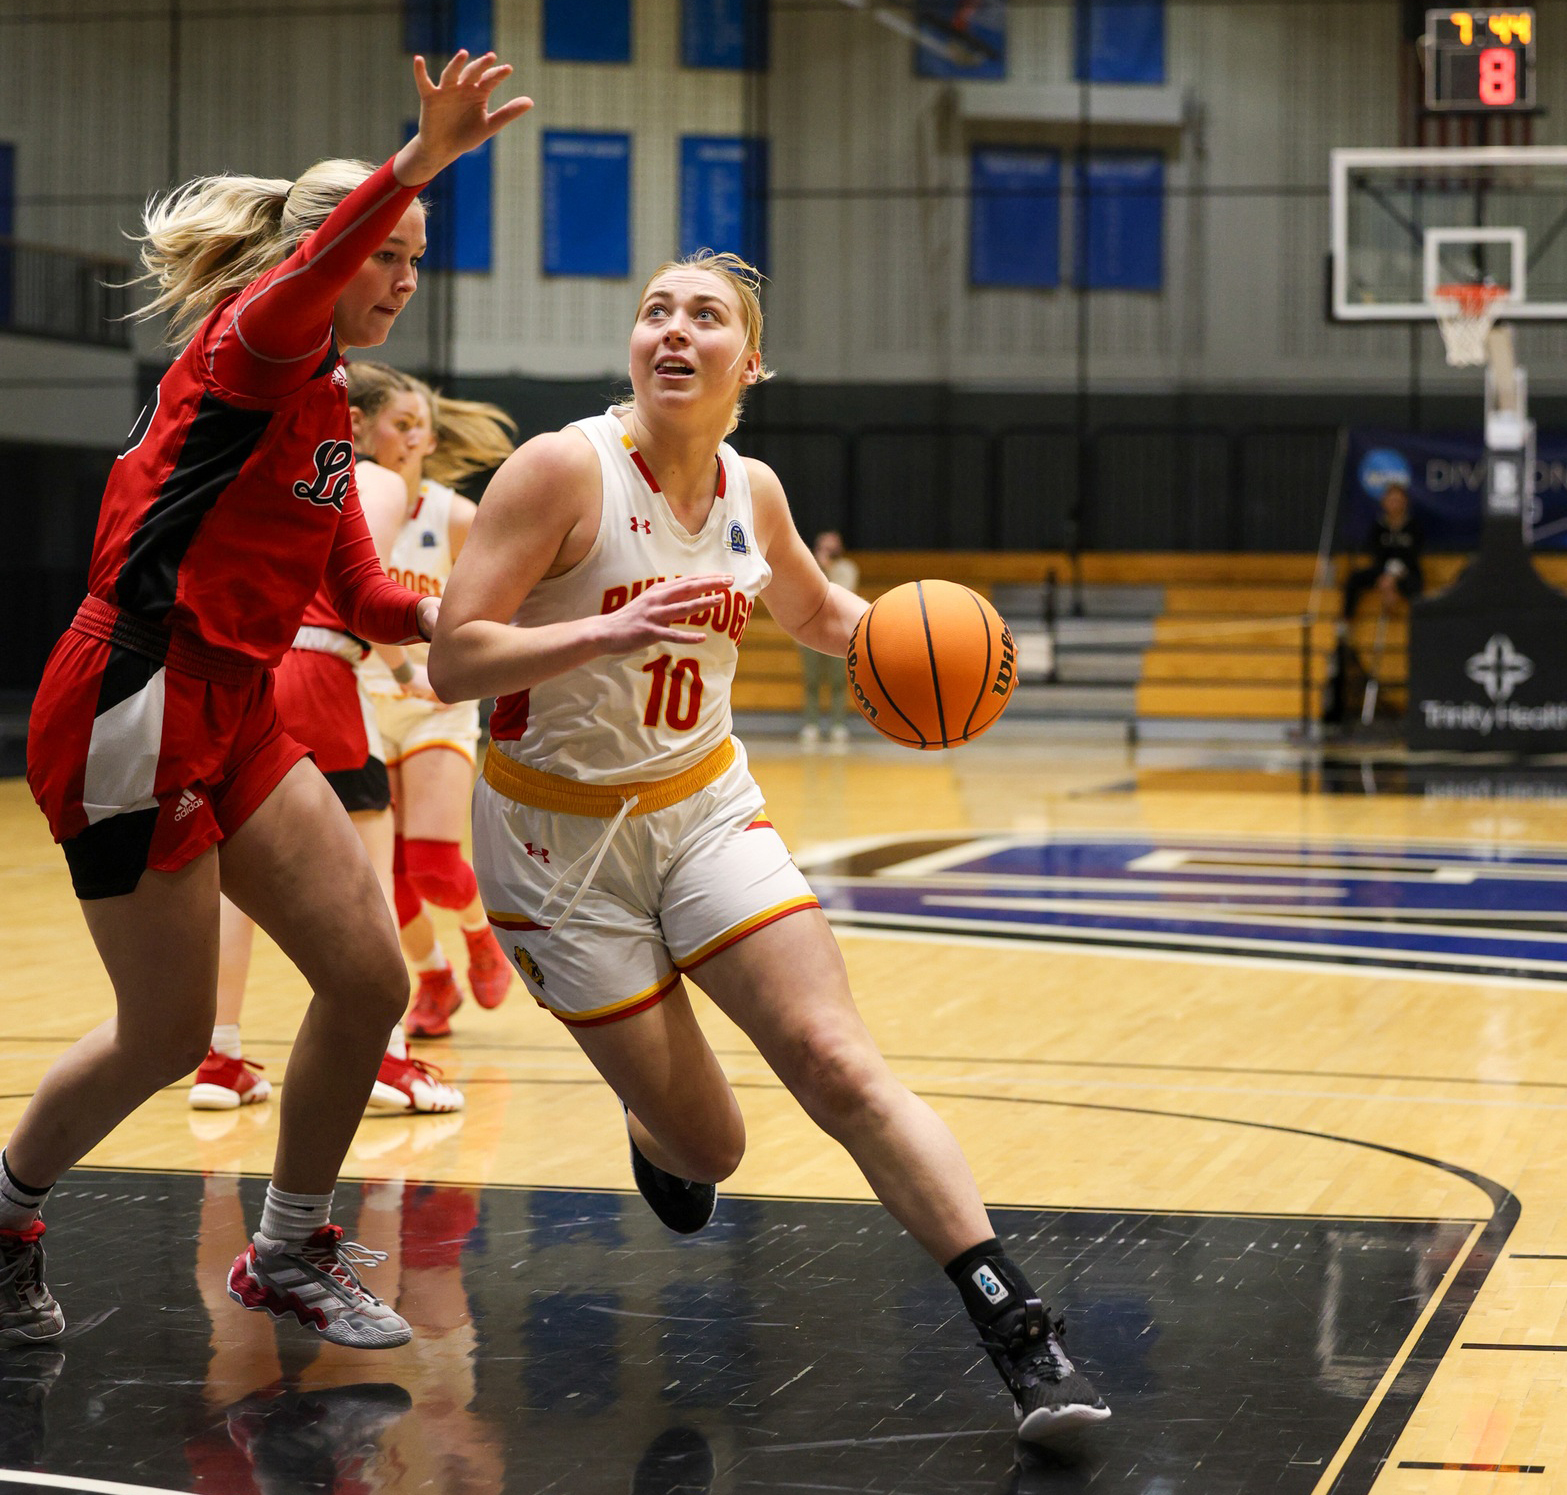 Ferris State basketball standout Chloe Idoni earns Academic All-America honors for second time